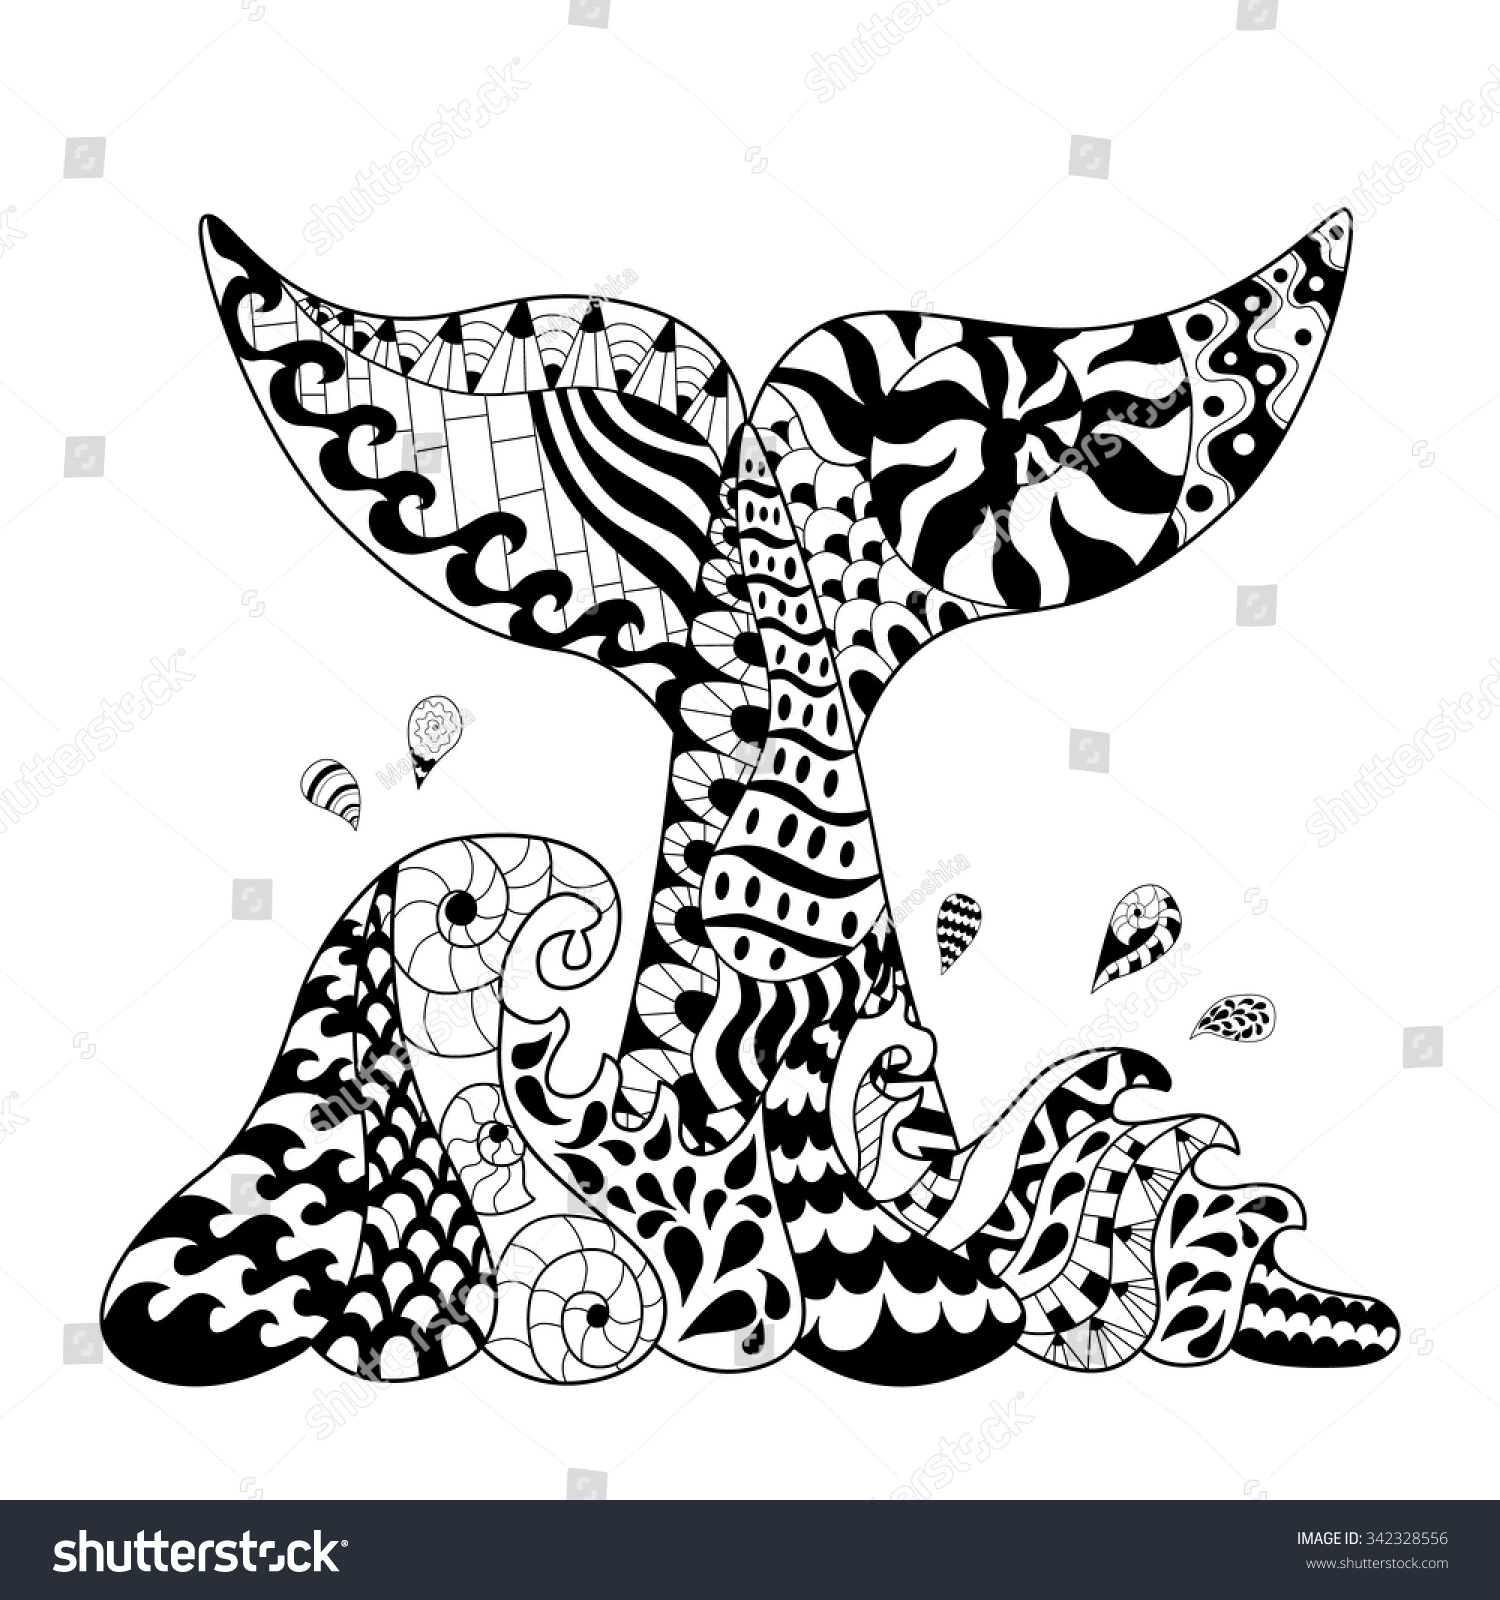 Hand Drawn Zentangle Waves Whale Tail For Adult Antis Tress Coloring Page With High Details